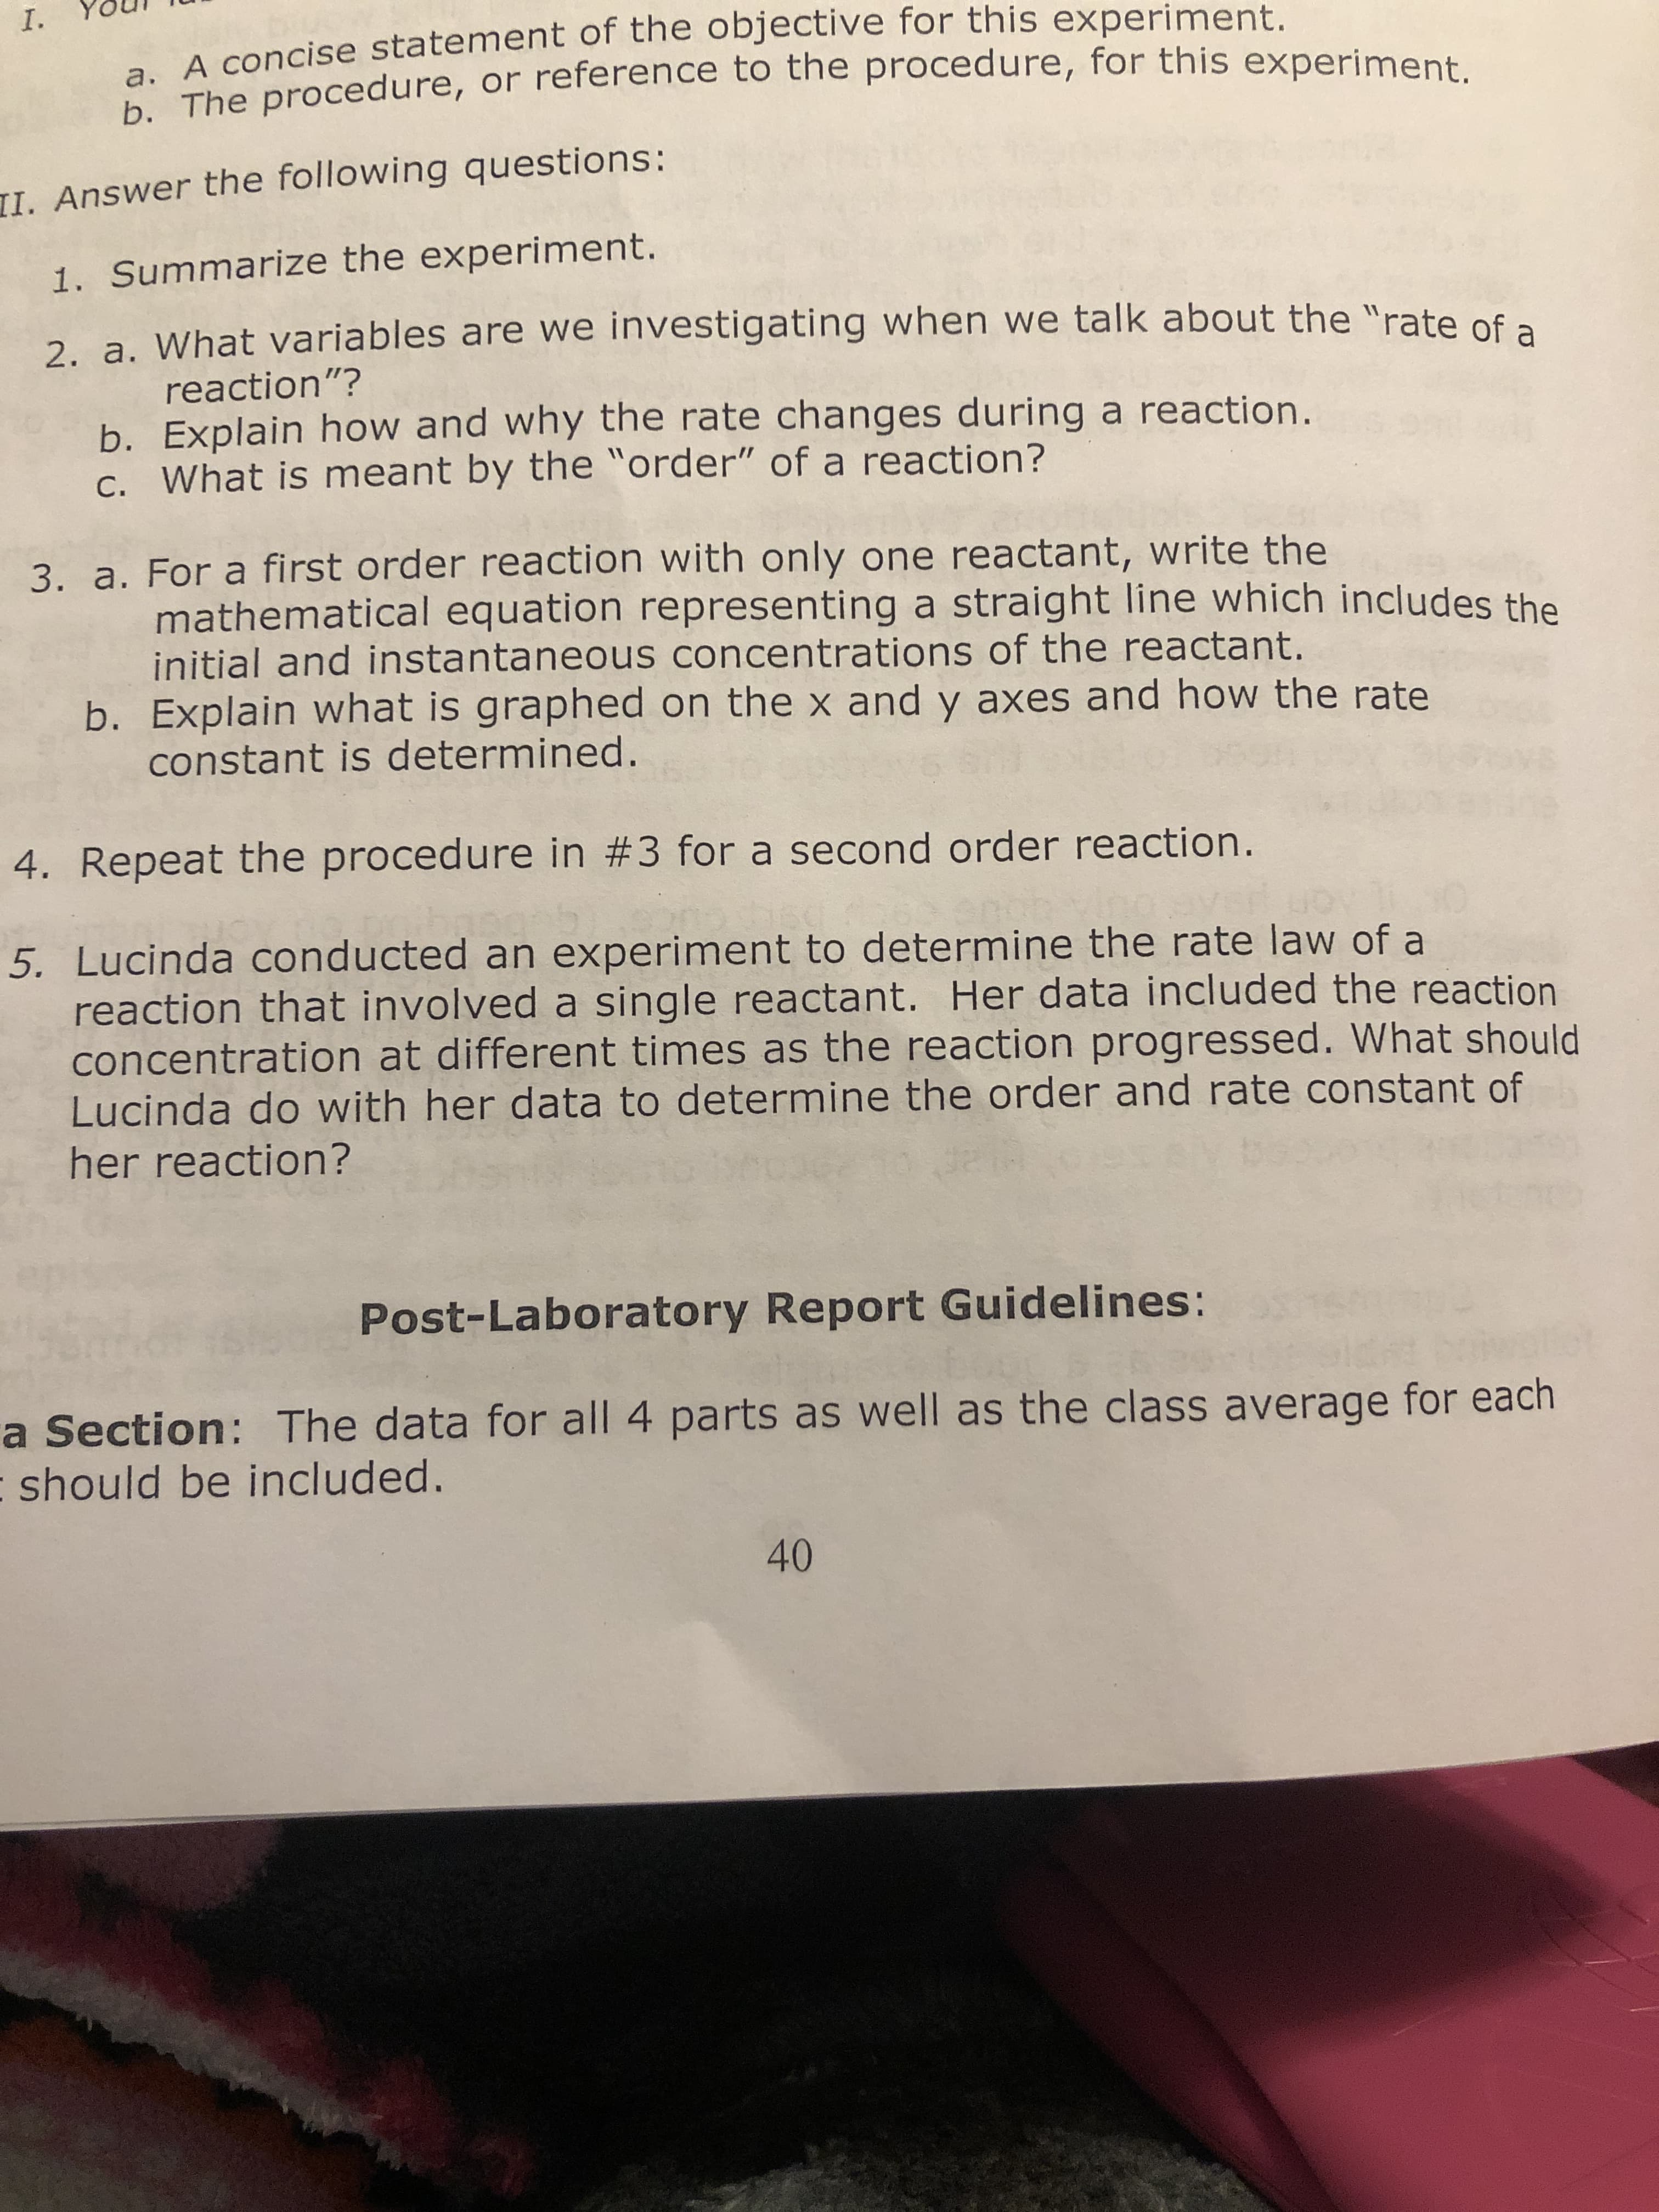 I.
A concise statement of the objective for this experiment.
b. The procedure, or reference to the procedure, for this experiment.
II. Answer the following questions:
1. Summarize the experiment.
2 a. What variables are we investigating when we talk about the "rate of a
reaction"?
b. Explain how and why the rate changes during a reaction.
c. What is meant by the "order" of a reaction?
3. a. For a first order reaction with only one reactant, write the
mathematical equation representing a straight line which includes the
initial and instantaneous concentrations of the reactant.
b. Explain what is graphed on the x and y axes and how the rate
constant is determined.
4. Repeat the procedure in #3 for a second order reaction.
5. Lucinda conducted an experiment to determine the rate law of a
reaction that involved a single reactant. Her data included the reaction
concentration at different times as the reaction progressed. What should
Lucinda do with her data to determine the order and rate constant of
her reaction?
Post-Laboratory Report Guidelines:
a Section: The data for all 4 parts as well as the class average for each
- should be included.
40
